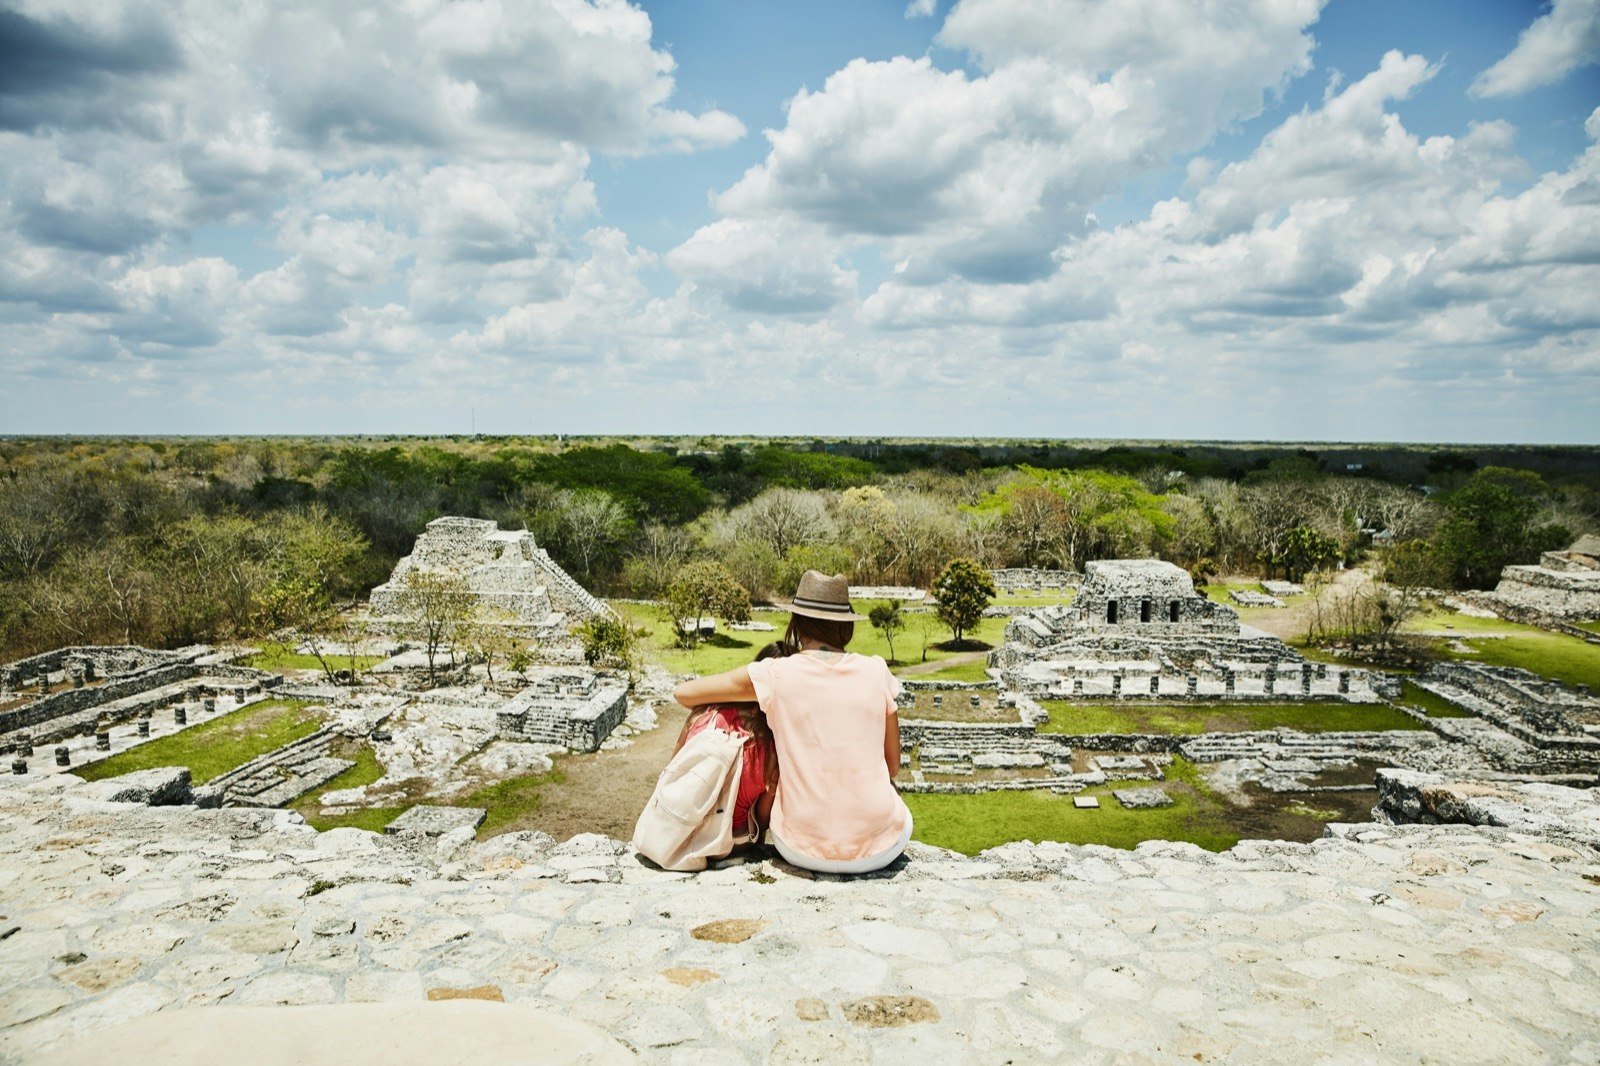 A woman and young girl embrace while sitting on a stone surface and looking out over the ruins of Mayapan 